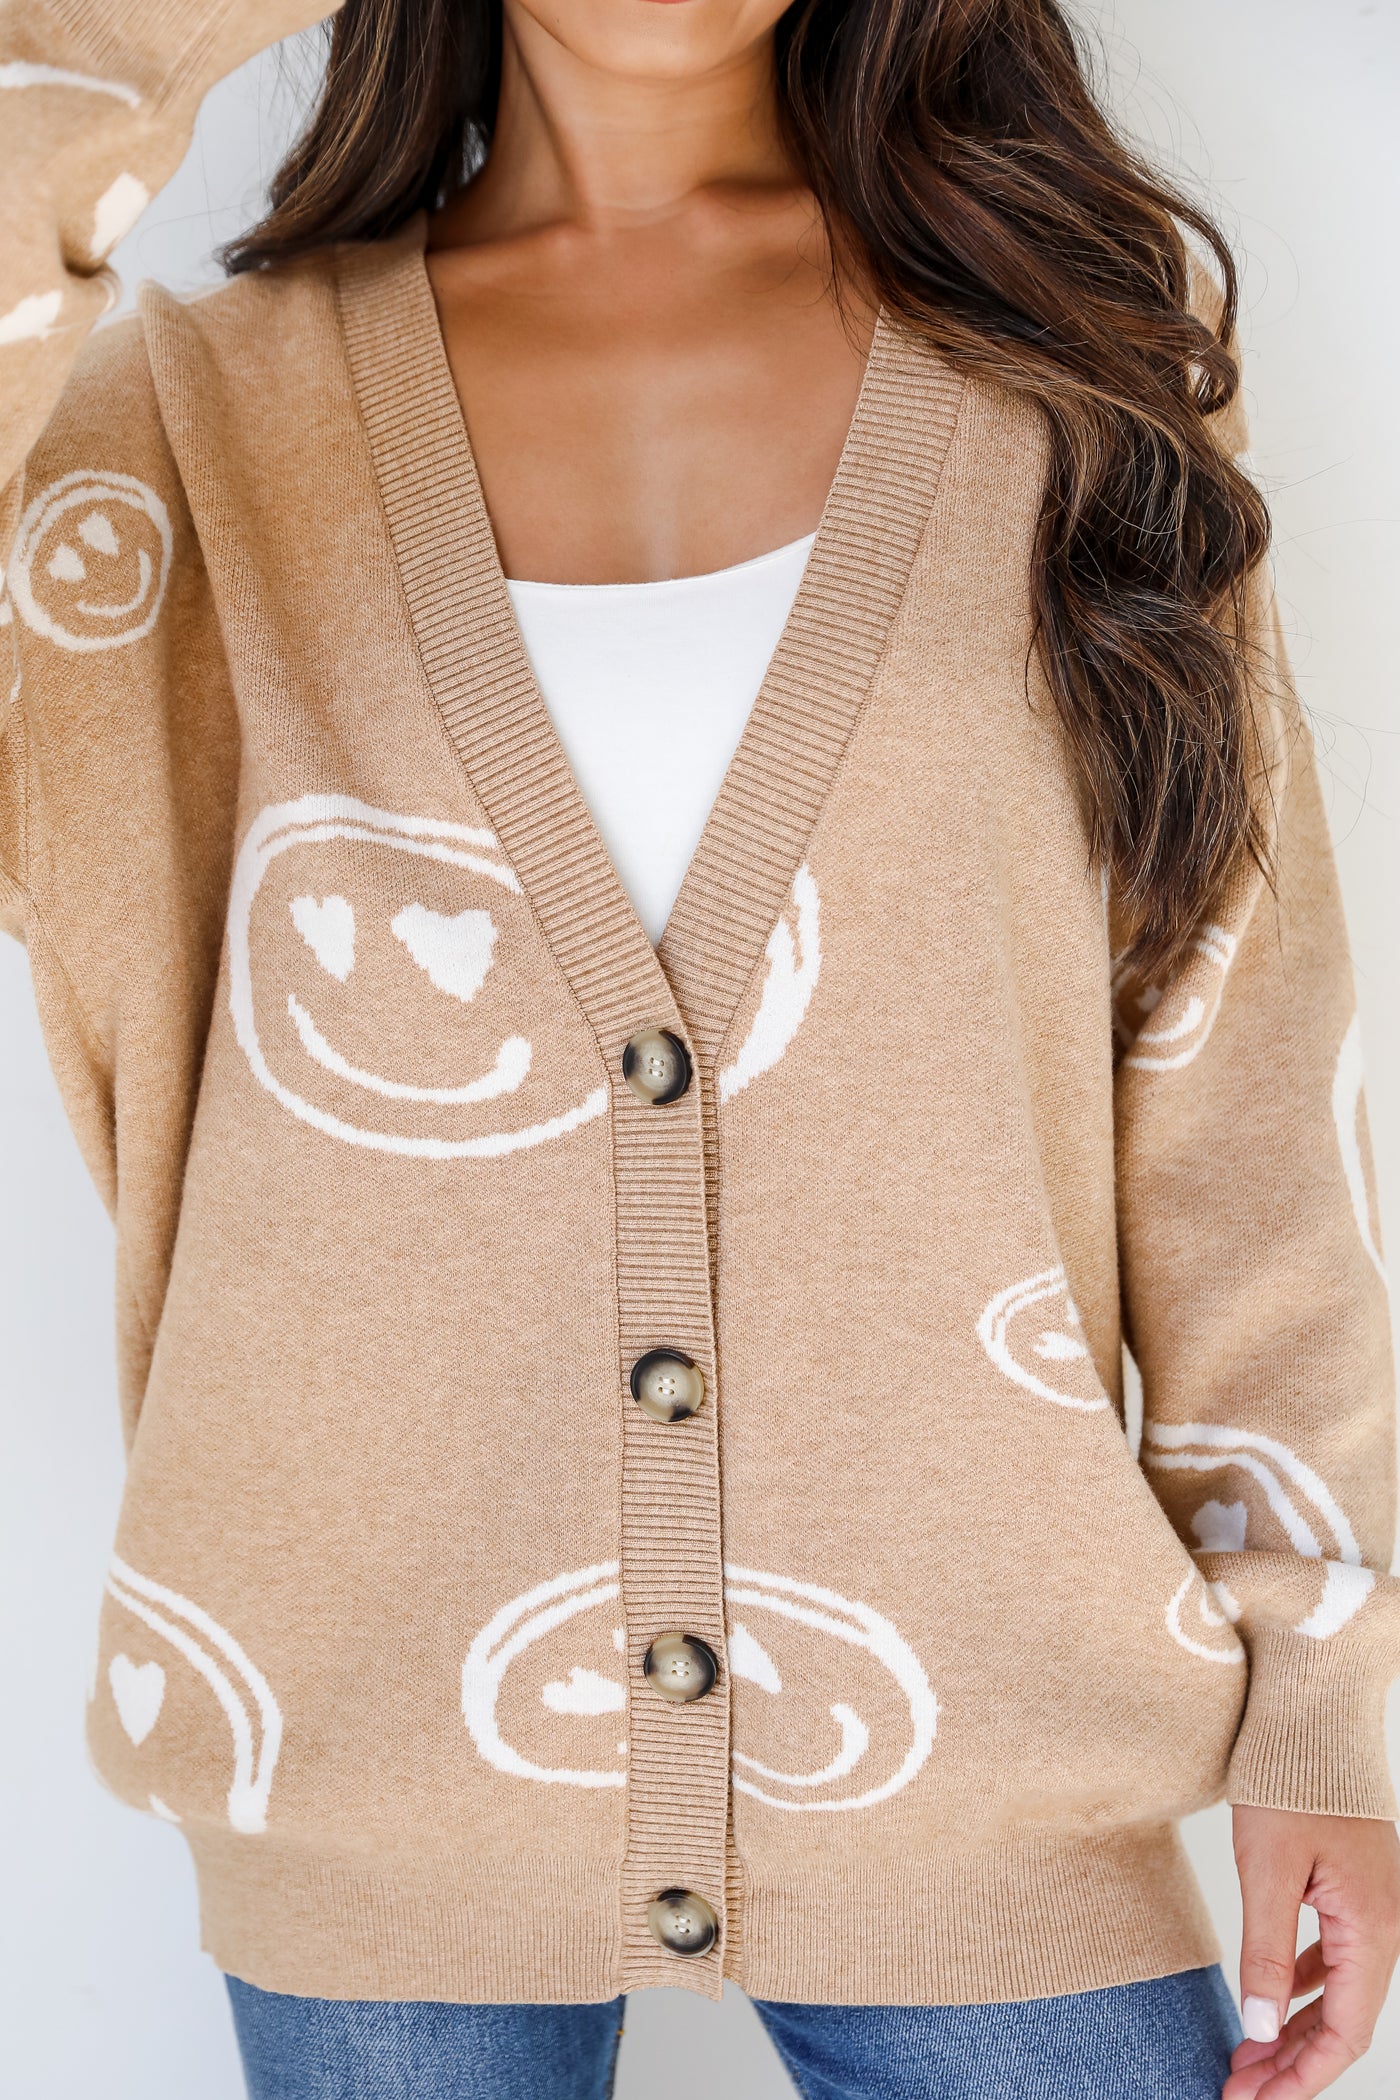 Smiley Face Sweater Cardigan front view